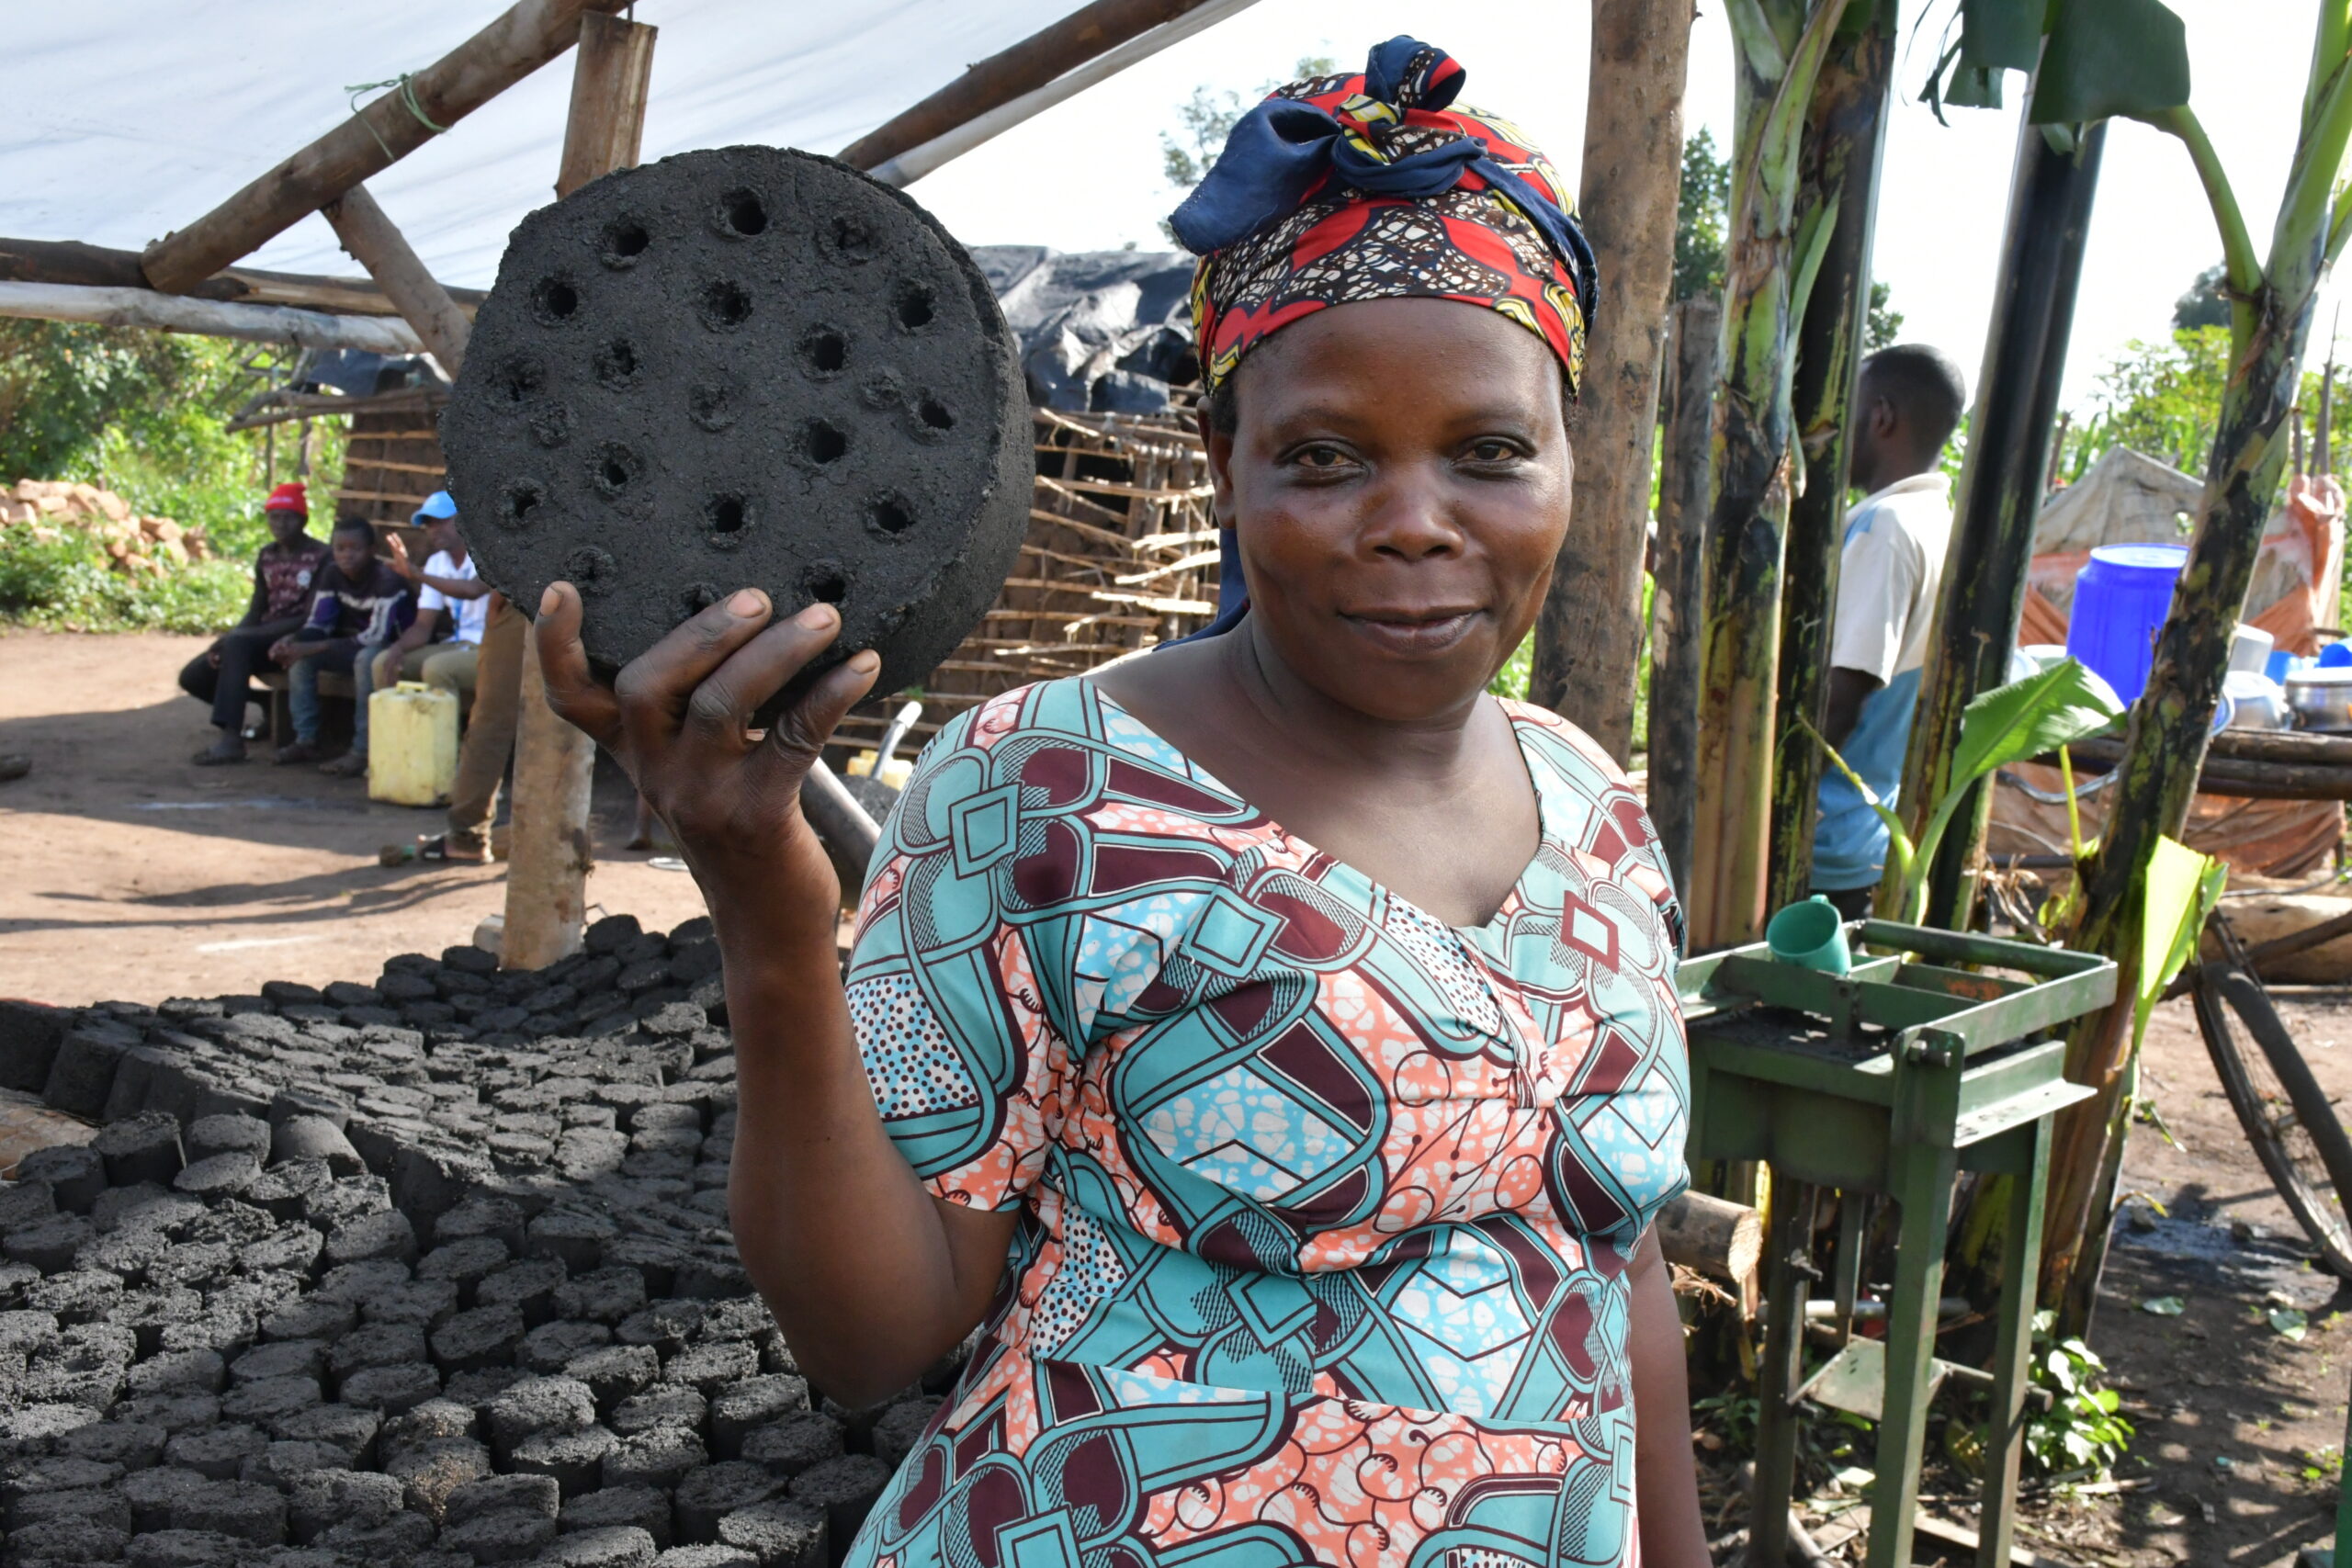 The briquette are made of recyclable agriculture waste and are not only affordable and long lasting but also environment friendly. © UNHCR/Duniya Aslam Khan